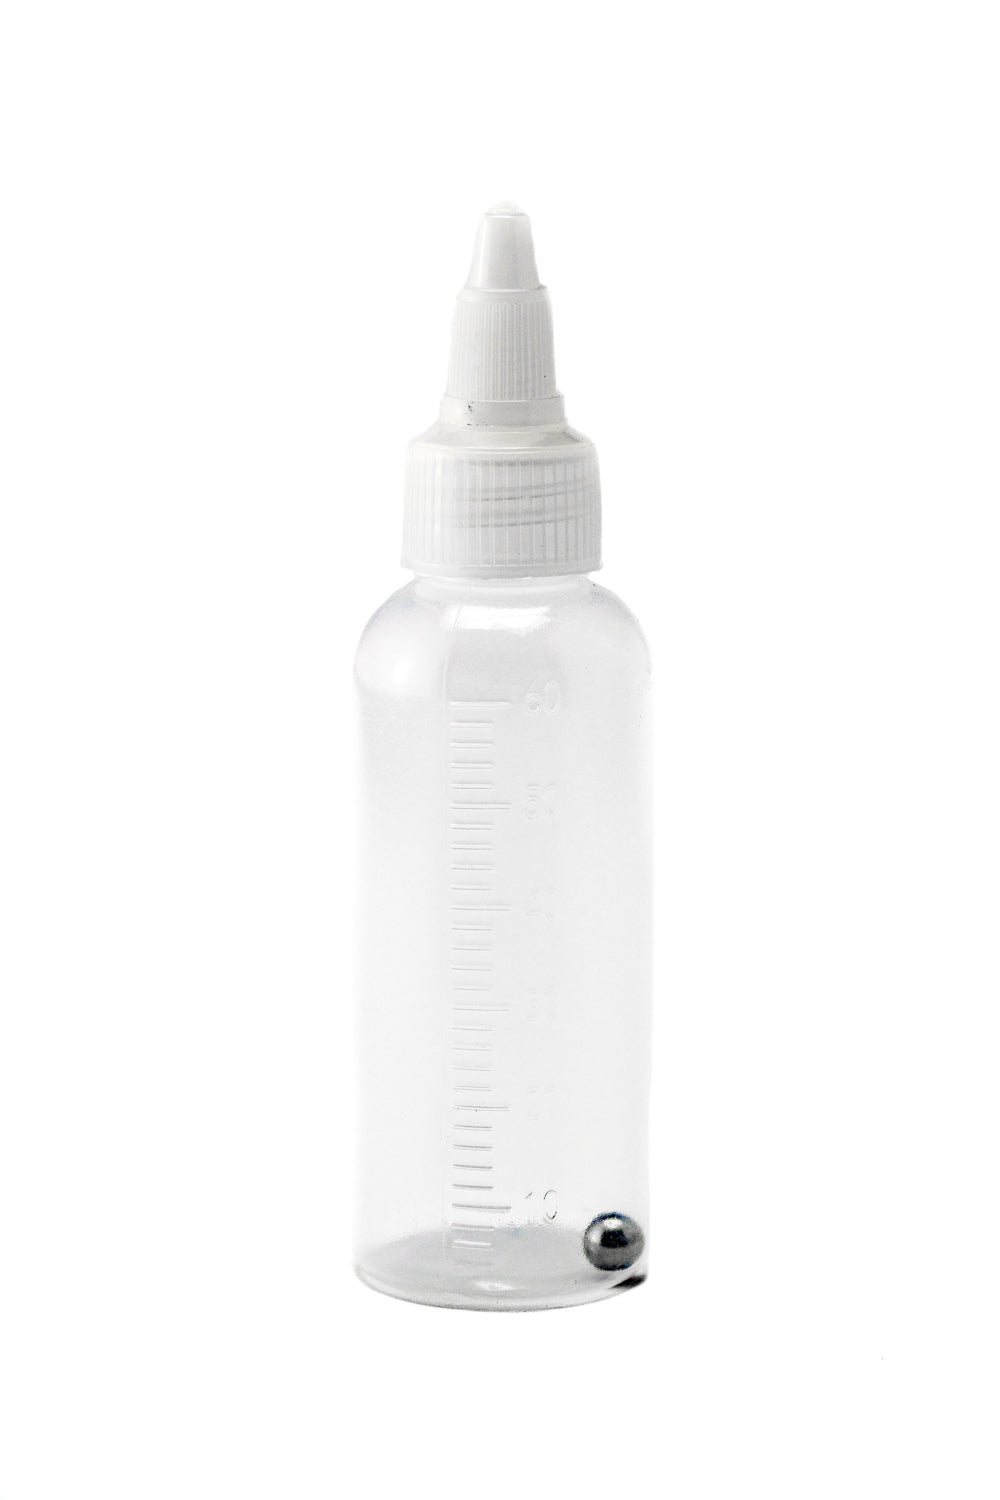 Refillable Artist's Mixing Bottle with Twist Open/Close Nozzle 60 ml